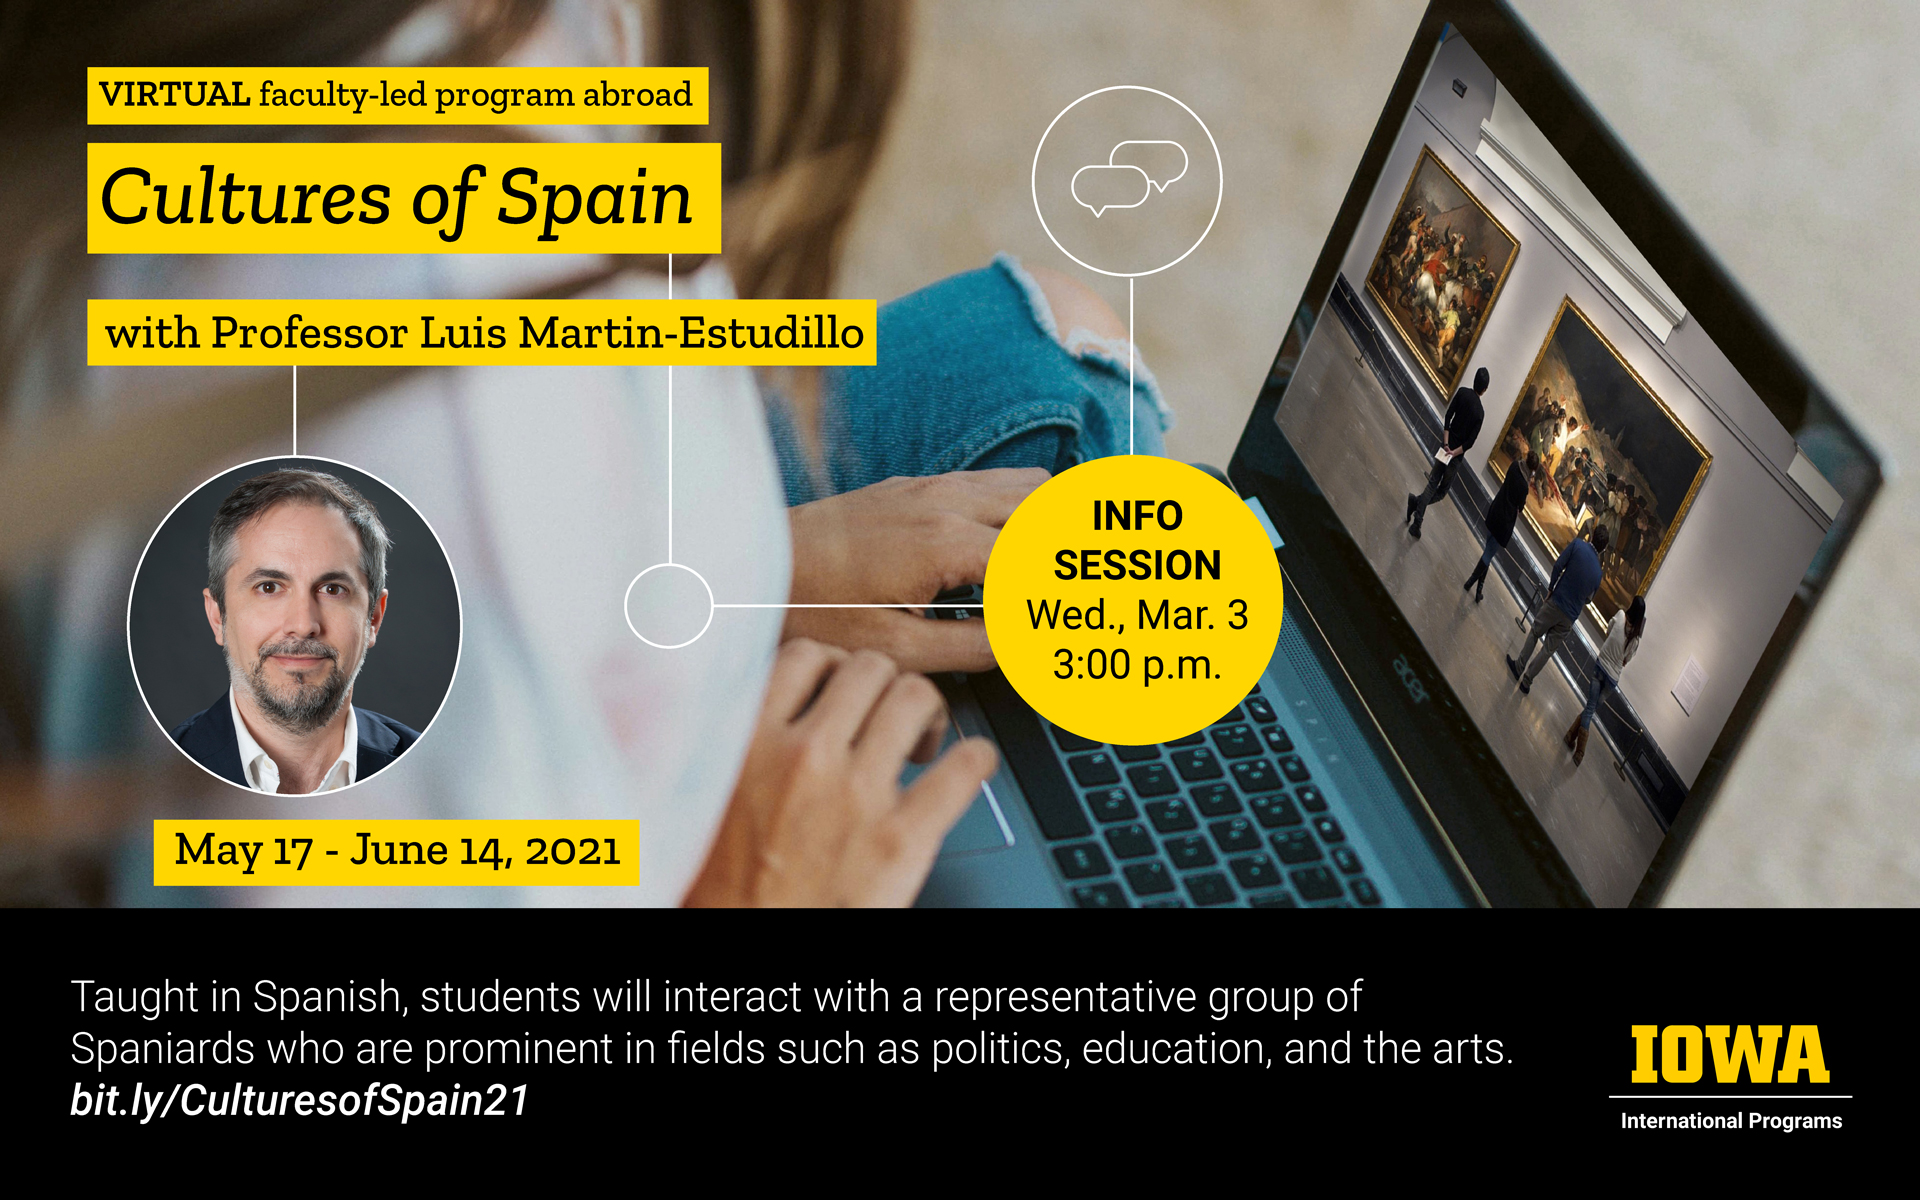 Virtual faculty-led program abroad Cultures of Spain with Professor Luis Martin-Estudillo happening May 17 through June 14, 2021. Info session Wednesday March 3, 2021 at 3:00pm. Taught in Spanish, students will interact with a representative group of Spaniards who are prominent in fields such as politics, education, and the arts. bit.ly/CulturesofSpain21